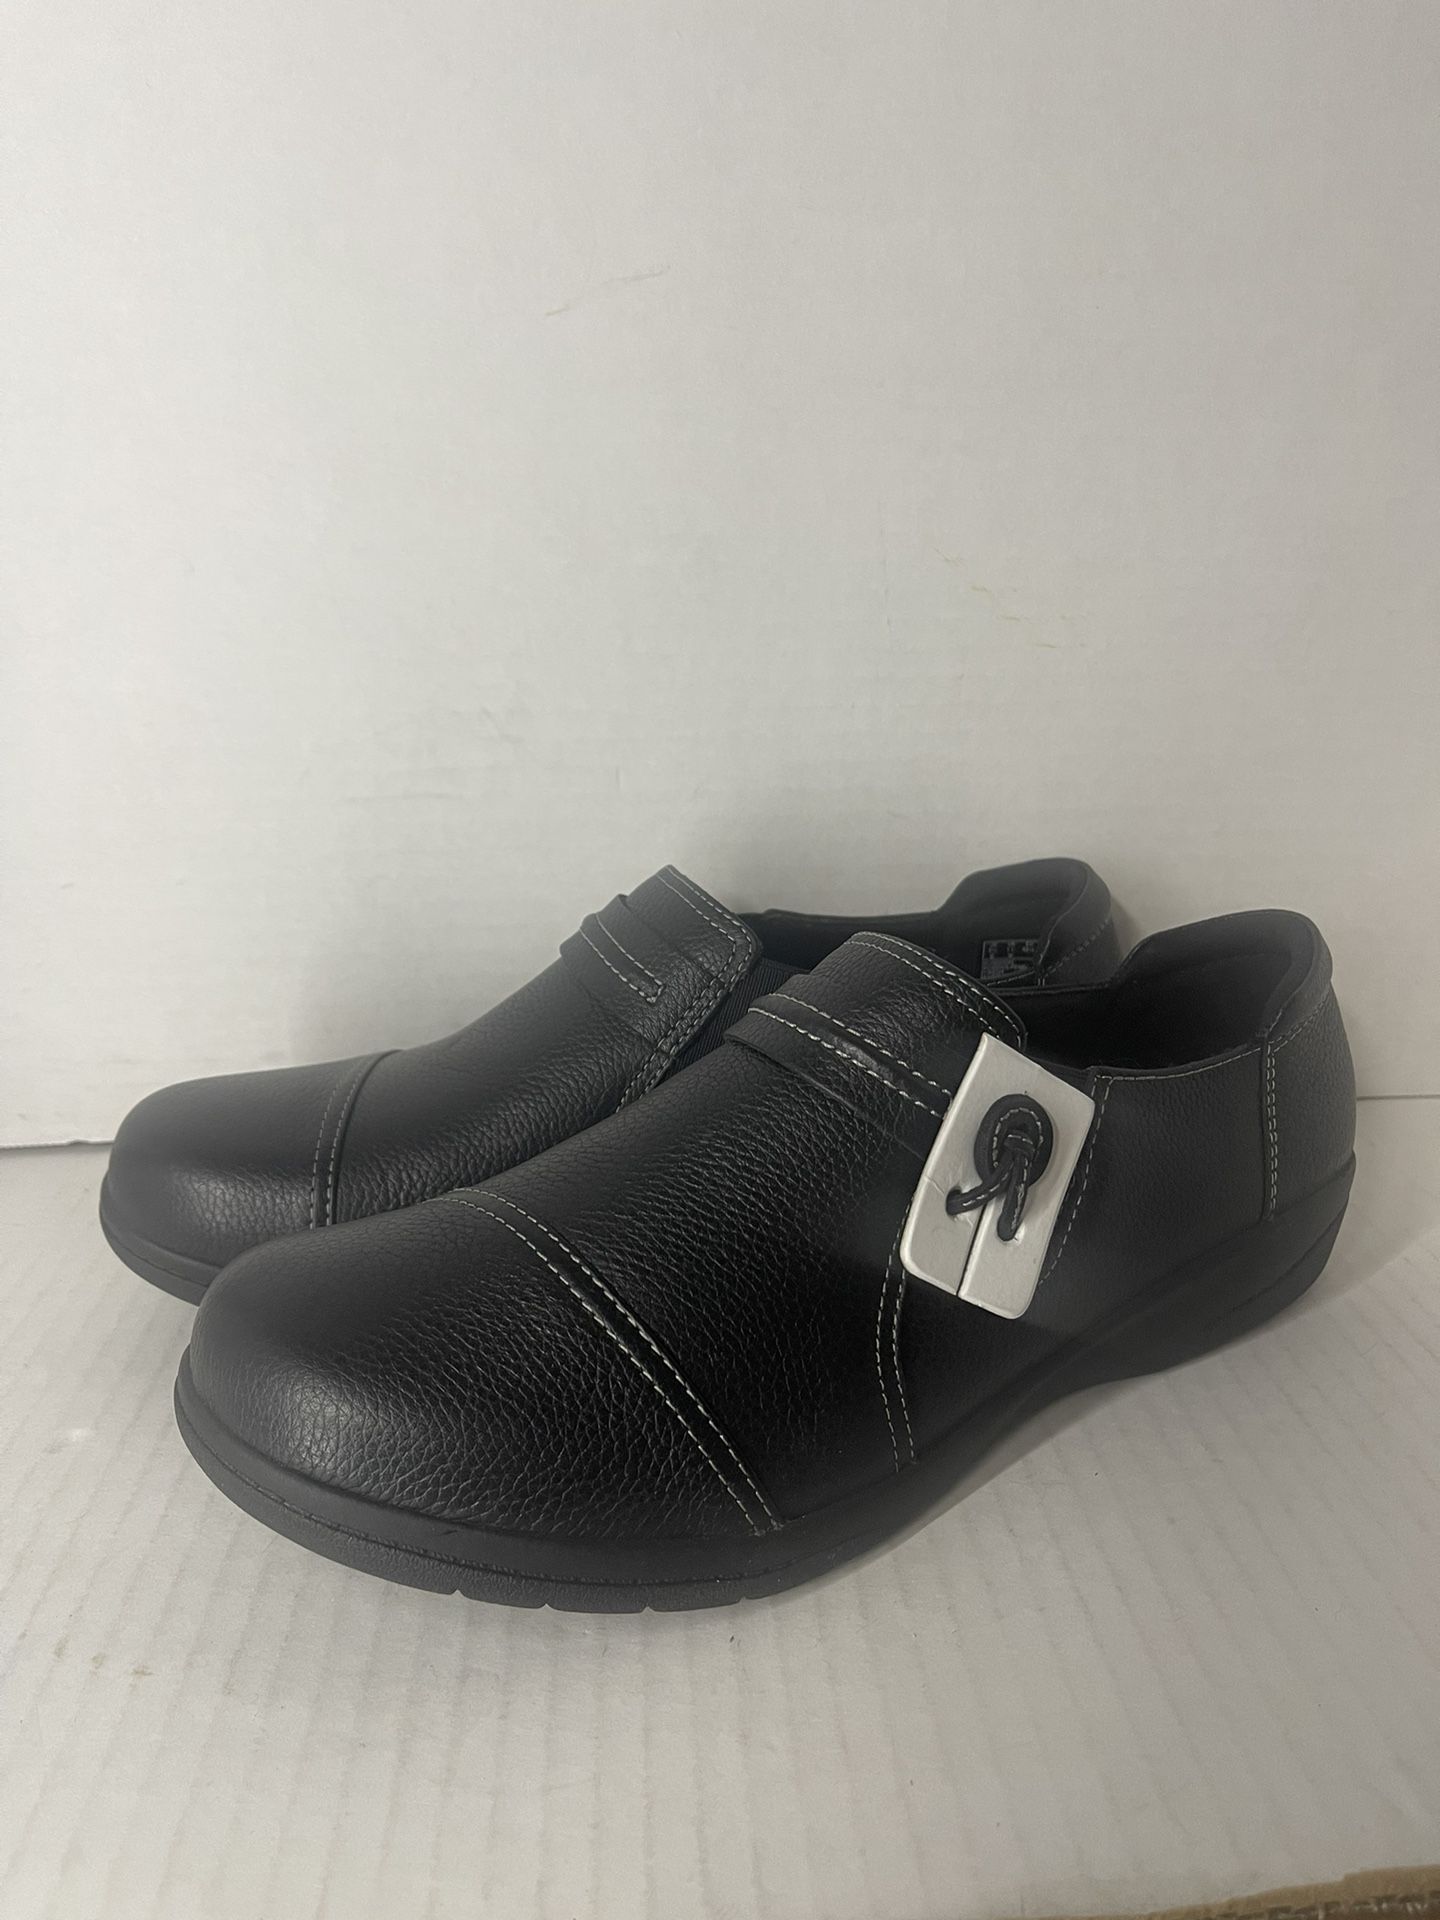 Clarks Shoes Womens 11 